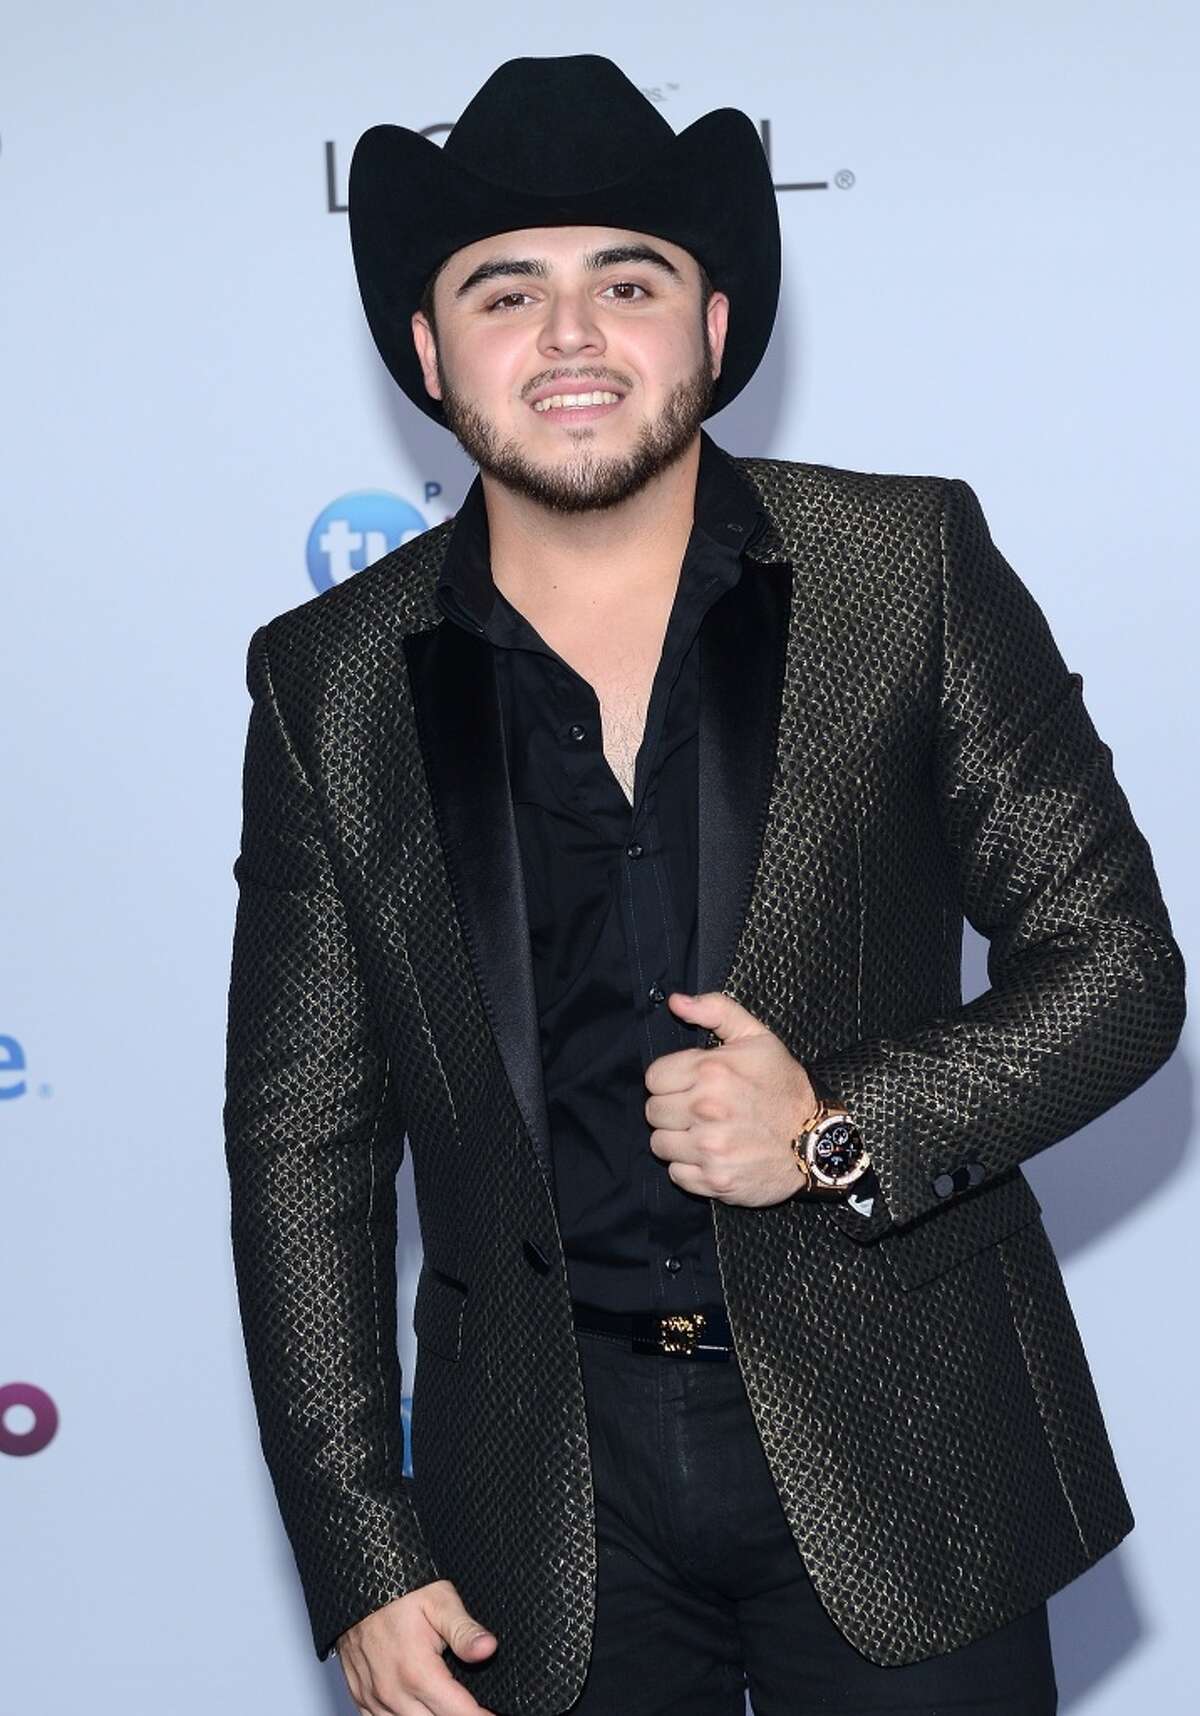 Mexican Music Star Gerardo Ortiz Arrested On Charges Stemming From